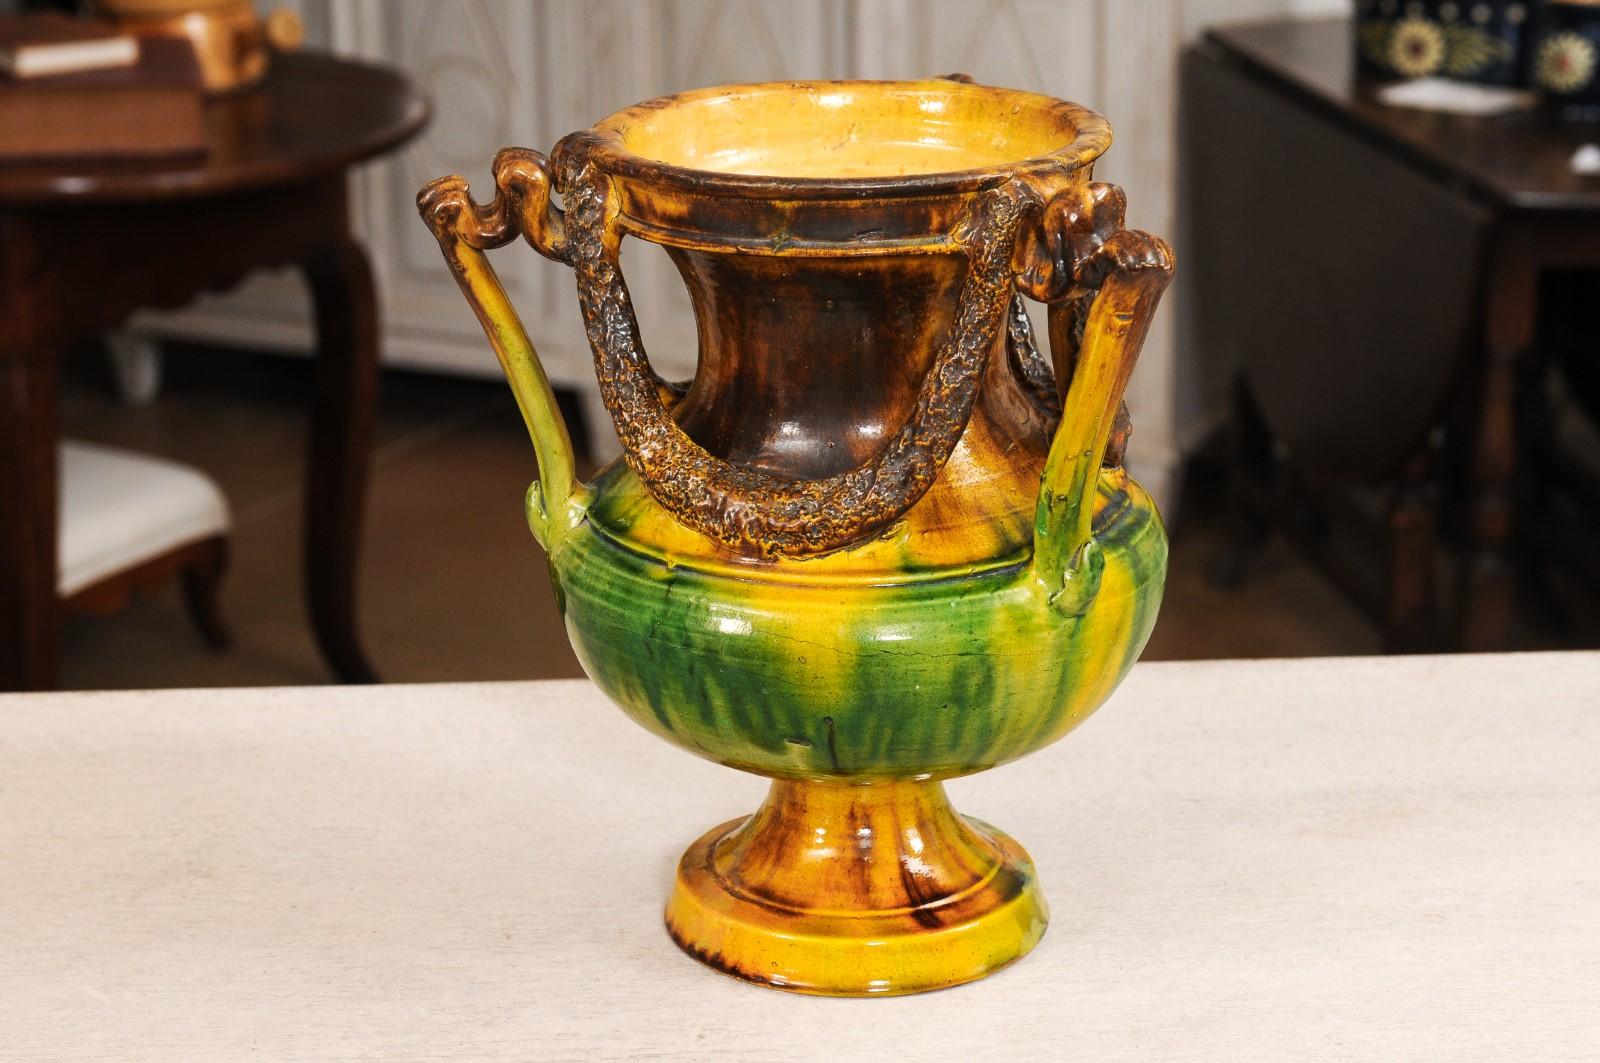 French Classical 19th Century Anduze Multi-Colored Glazed Vase with Swag Motifs For Sale 9